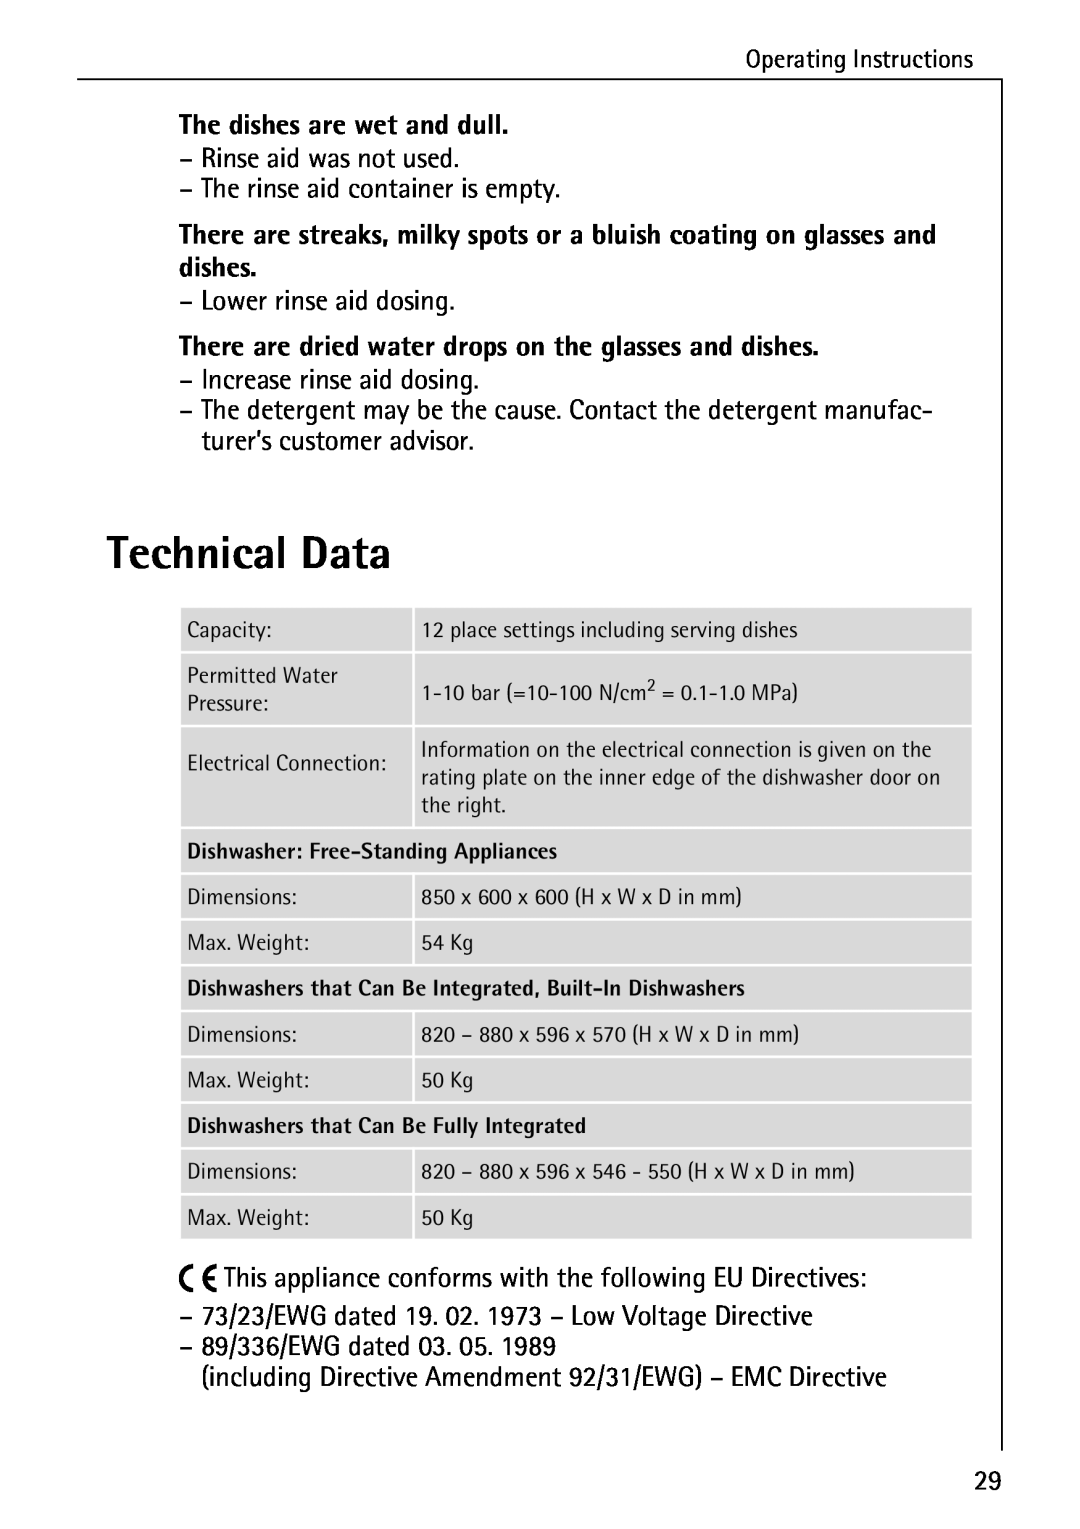 AEG 50800 manual Technical Data, The dishes are wet and dull 